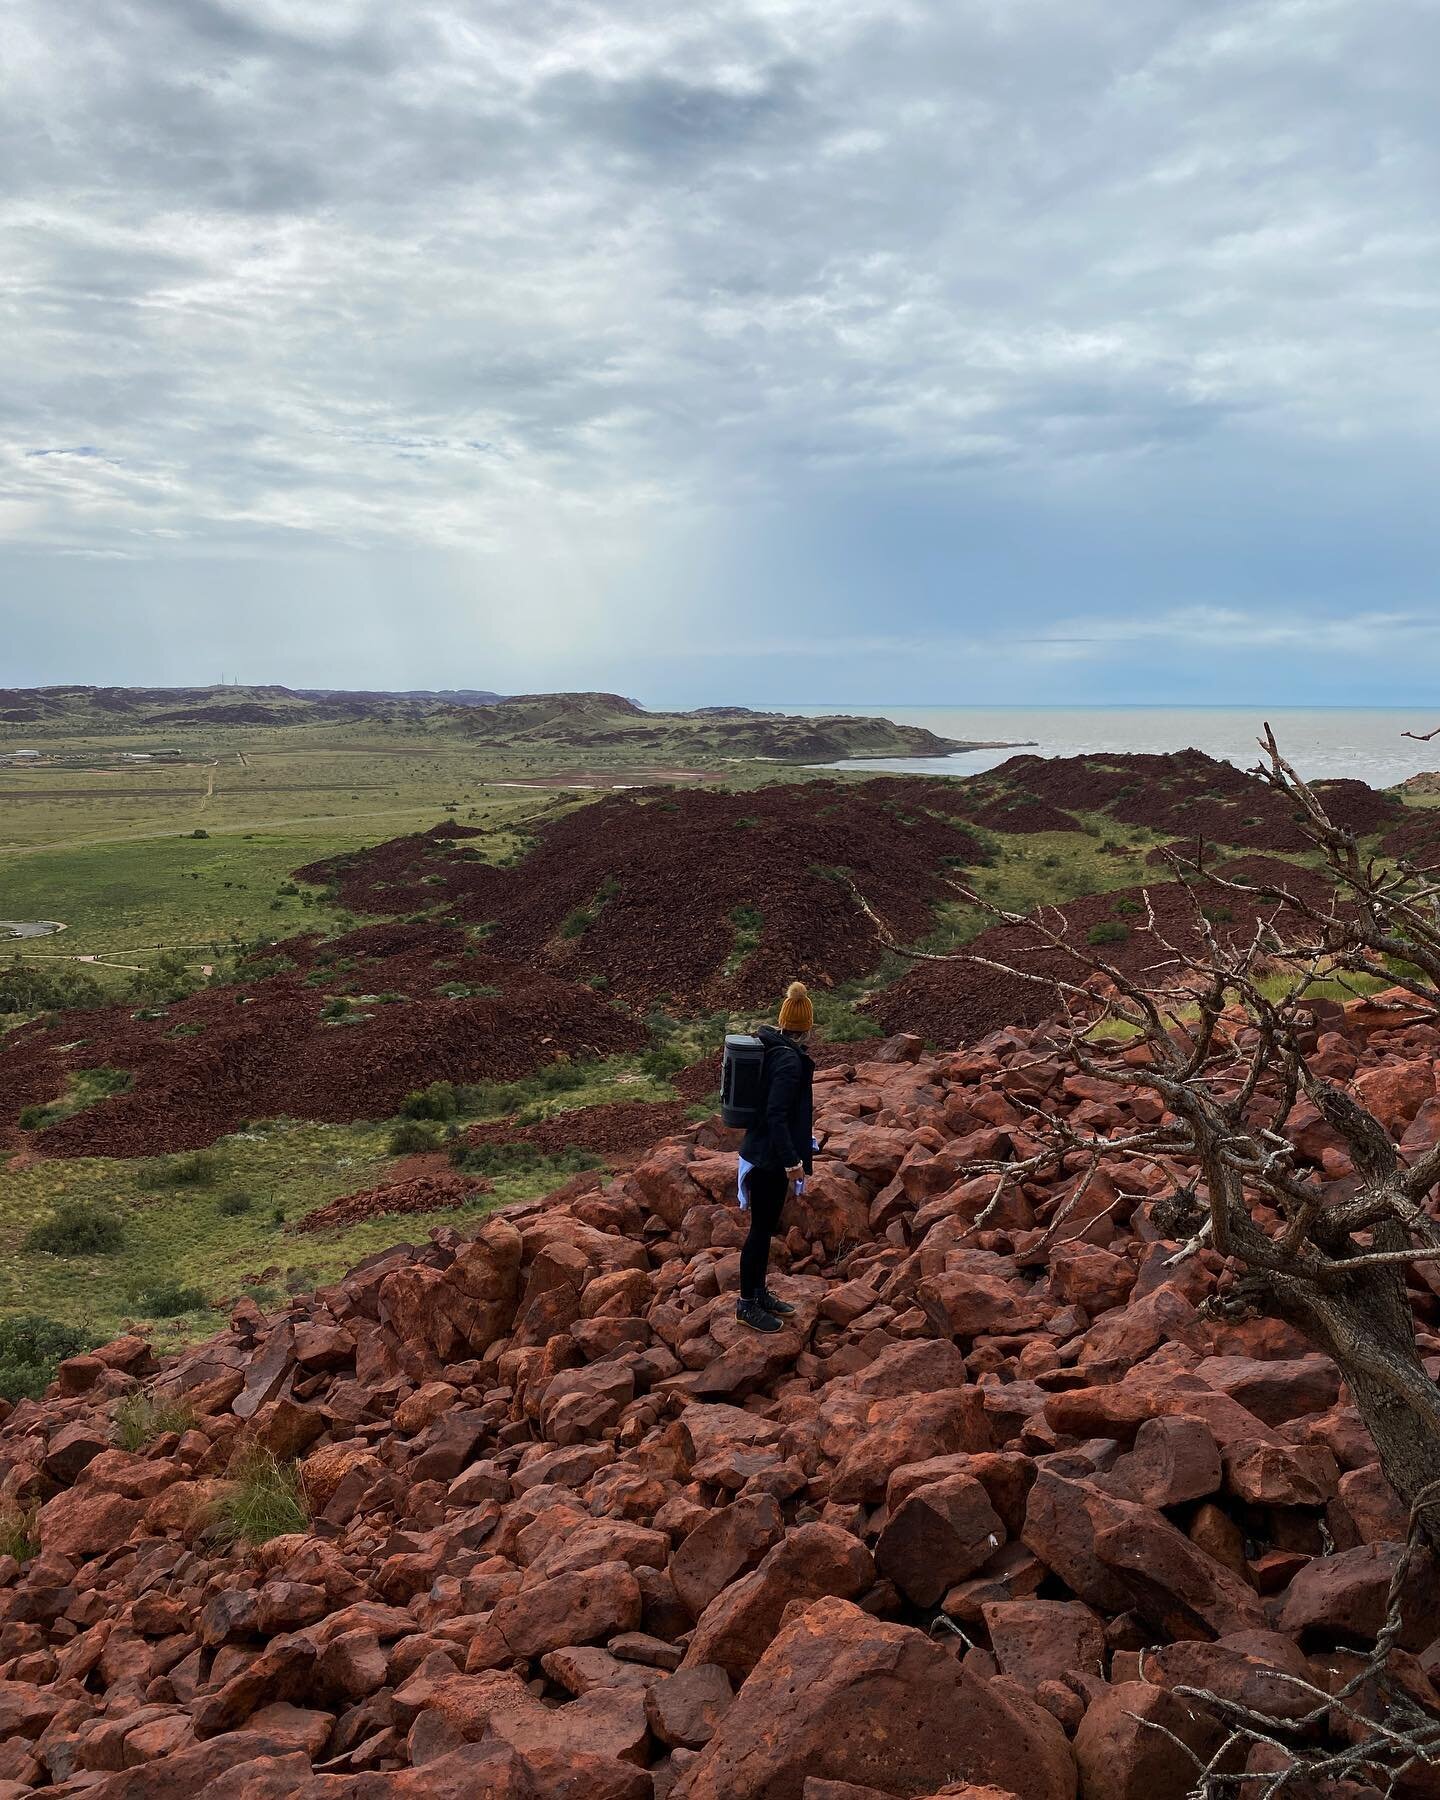 Out exploring today with @crackerjackpaddlesports after a huge couple of weeks with M4MH.

Its a non negotiable for me to schedule time outdoors to restore and process 🌧

Anyone else get out in this moody weather in the Pilbara?

#mentalhealth #ment